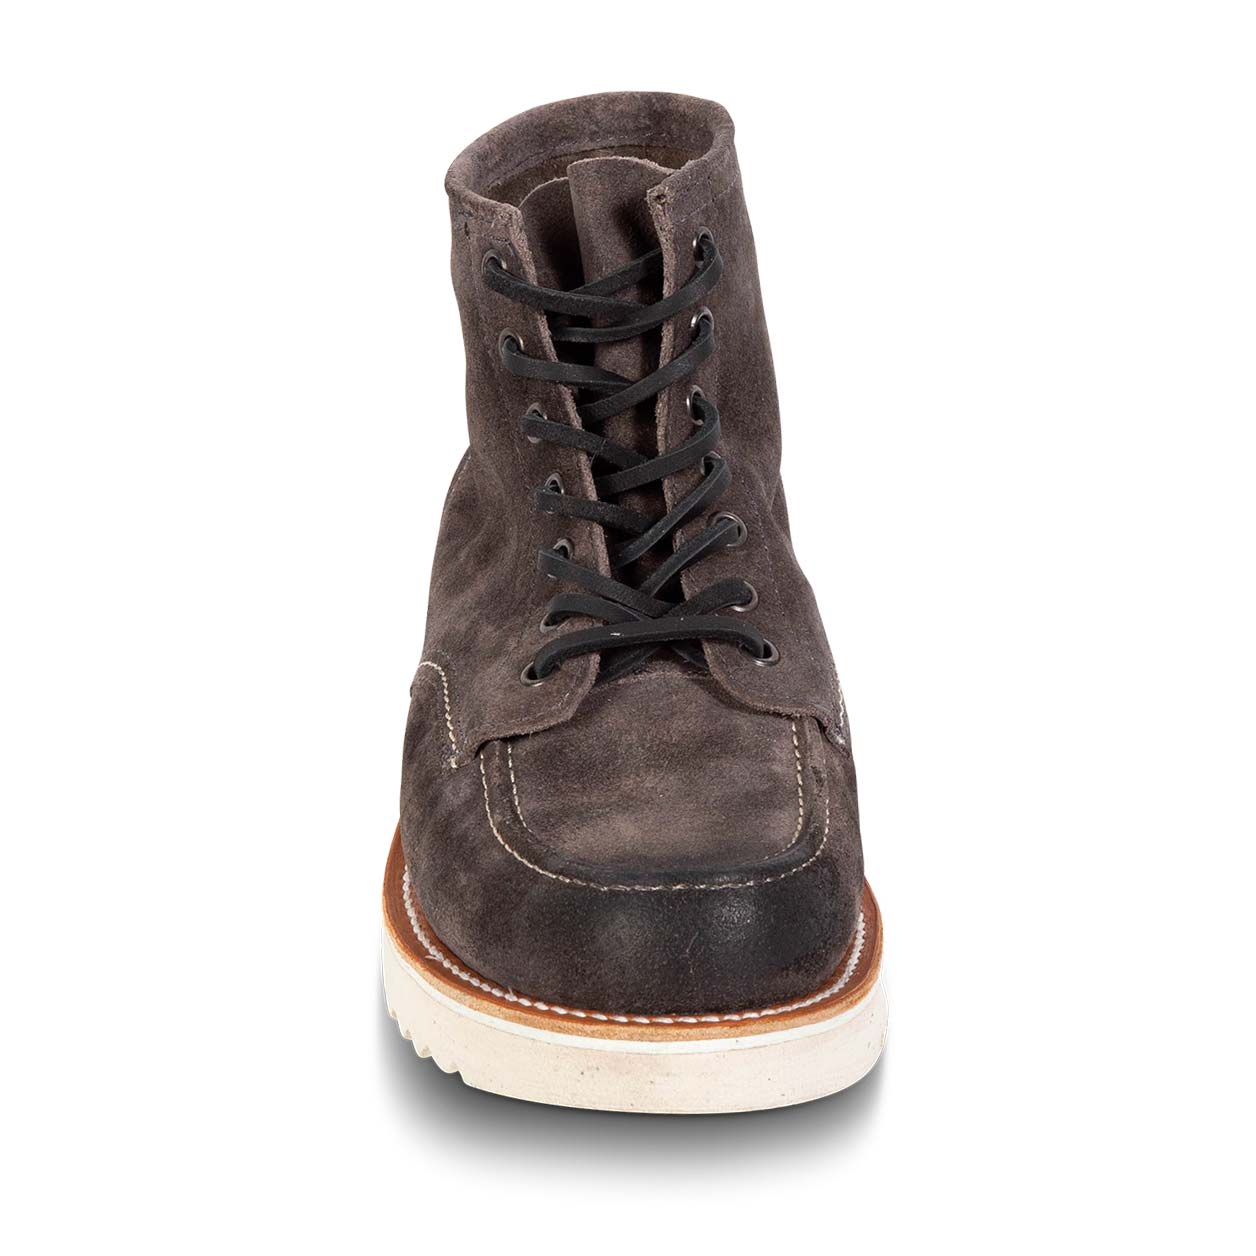 Front view showing suede tongue construction and adjustable leather lace closure on FREEBIRD men's Carbon grey suede shoe